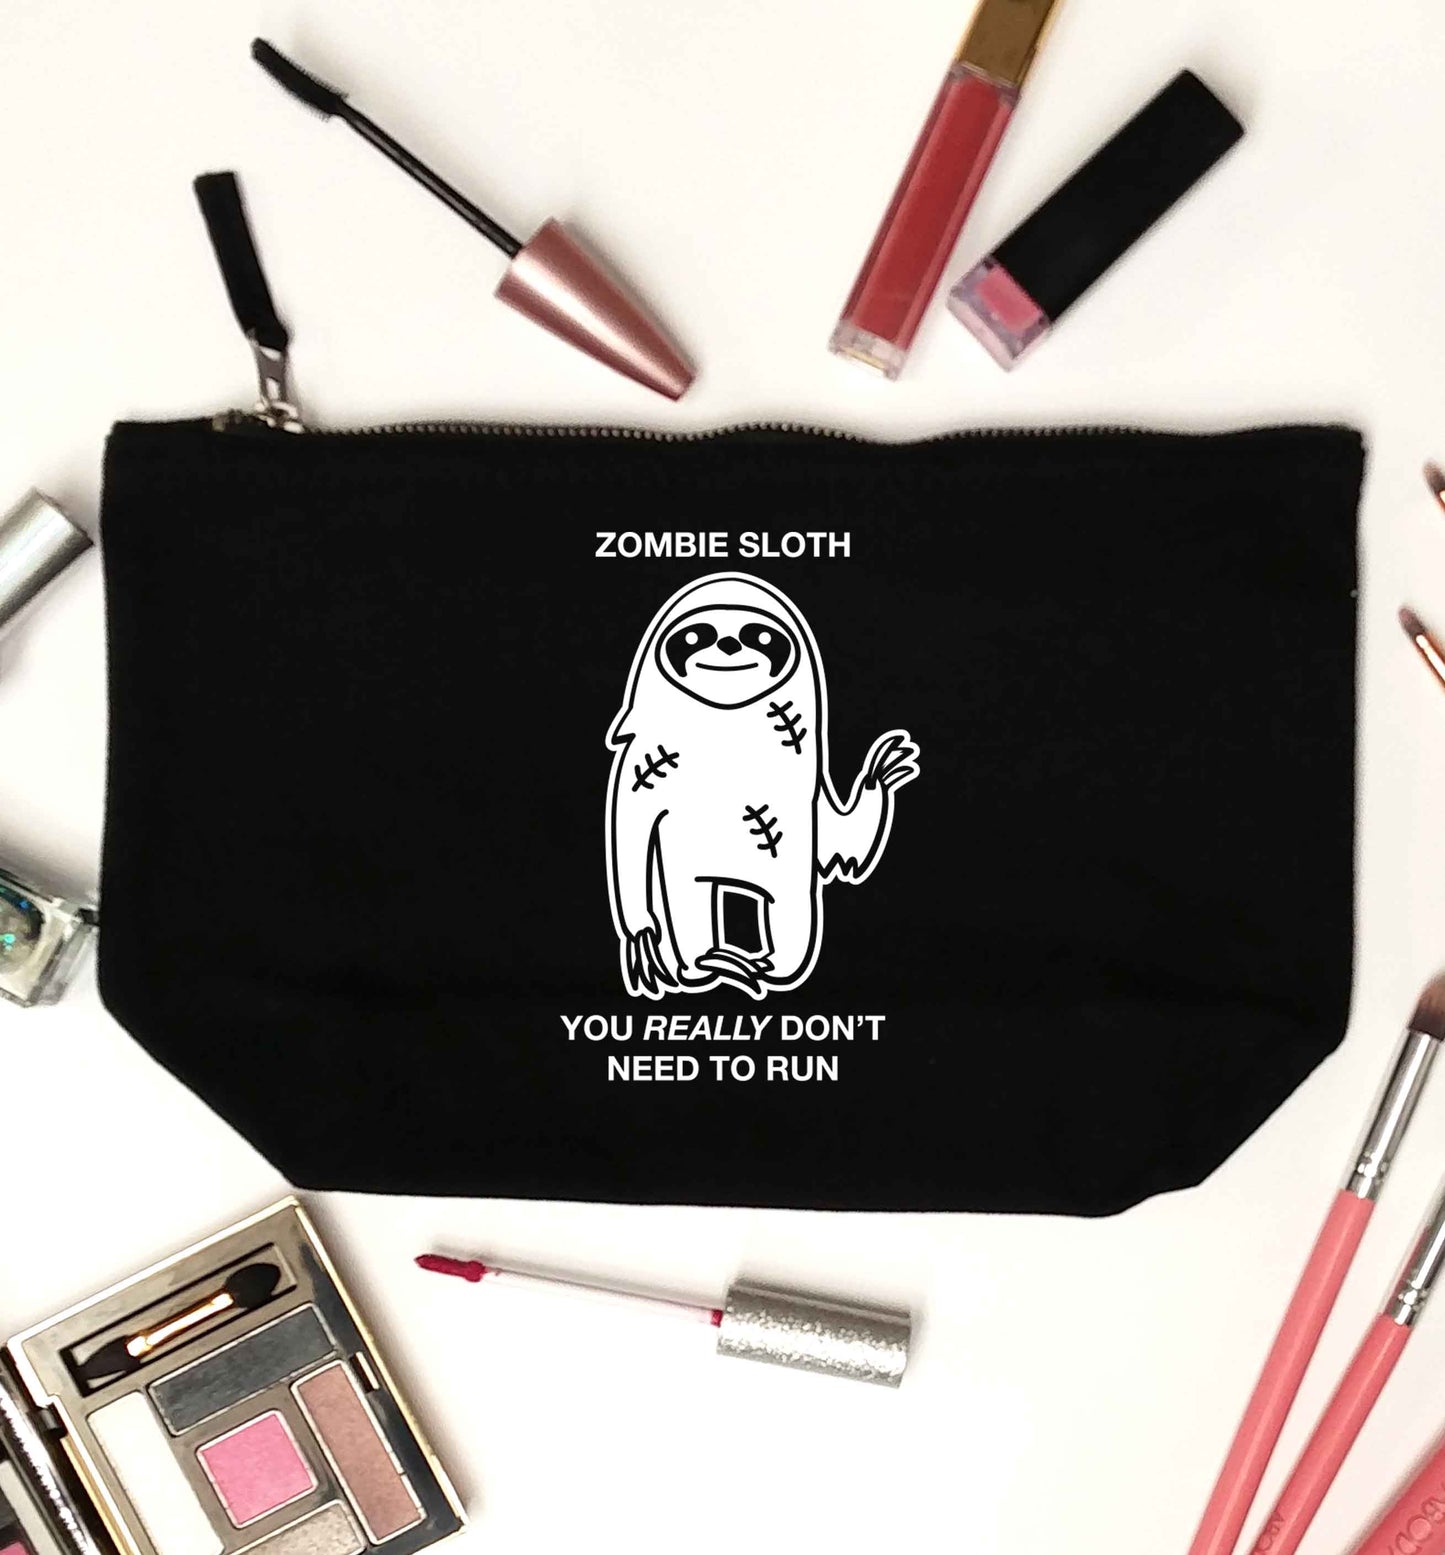 Zombie sloth you really don't need to run black makeup bag